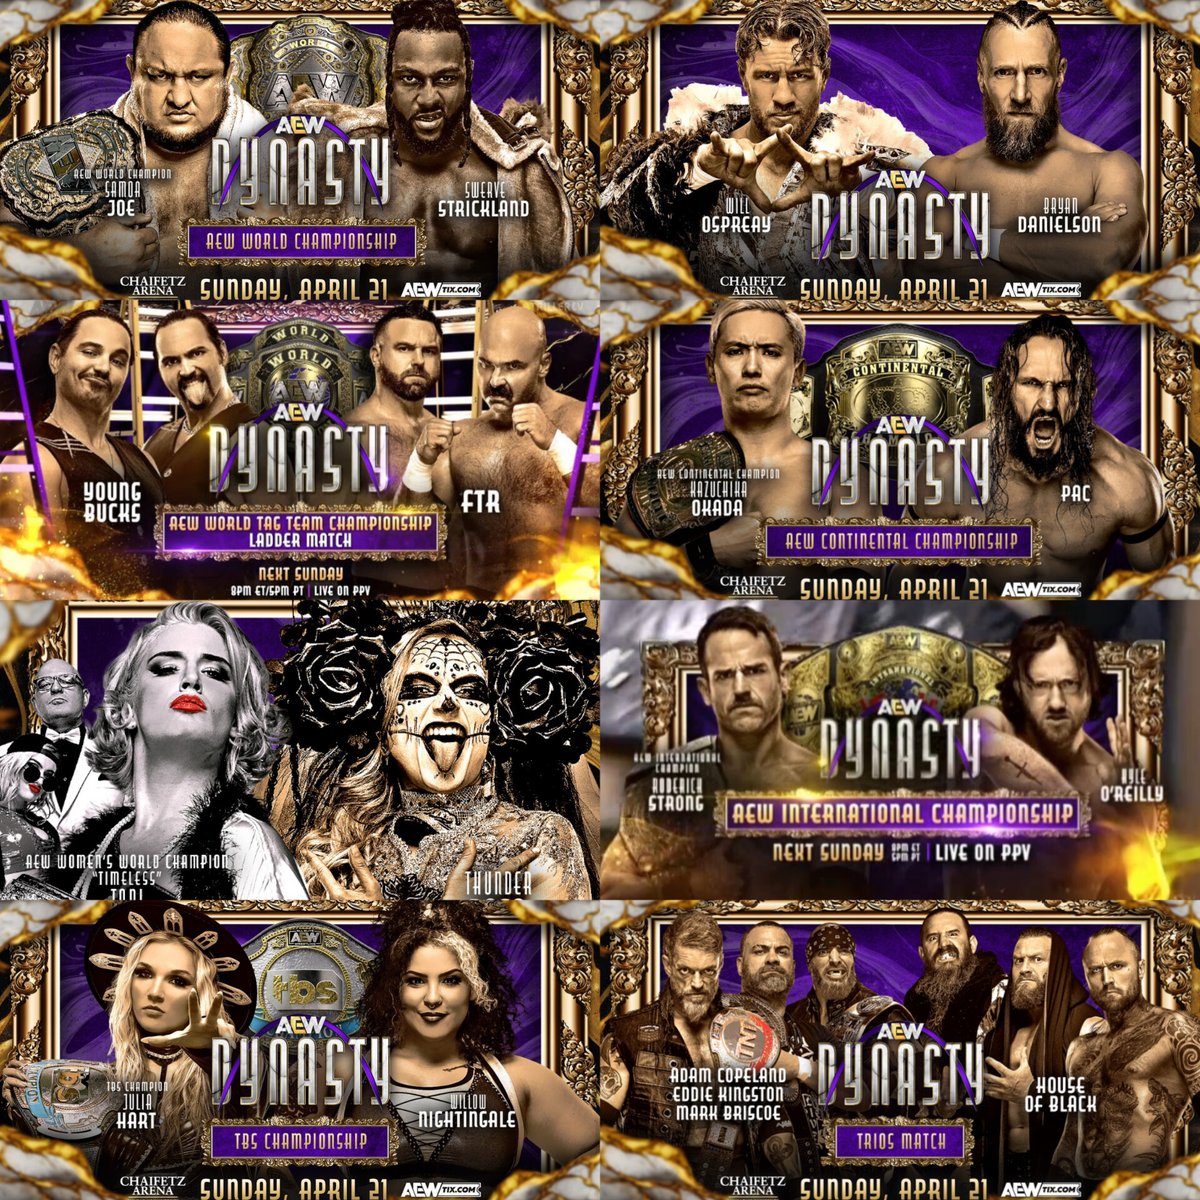 Dude, this Dynasty card is absolutely MENTAL. Some of the strongest lineups I've ever seen for a PPV.